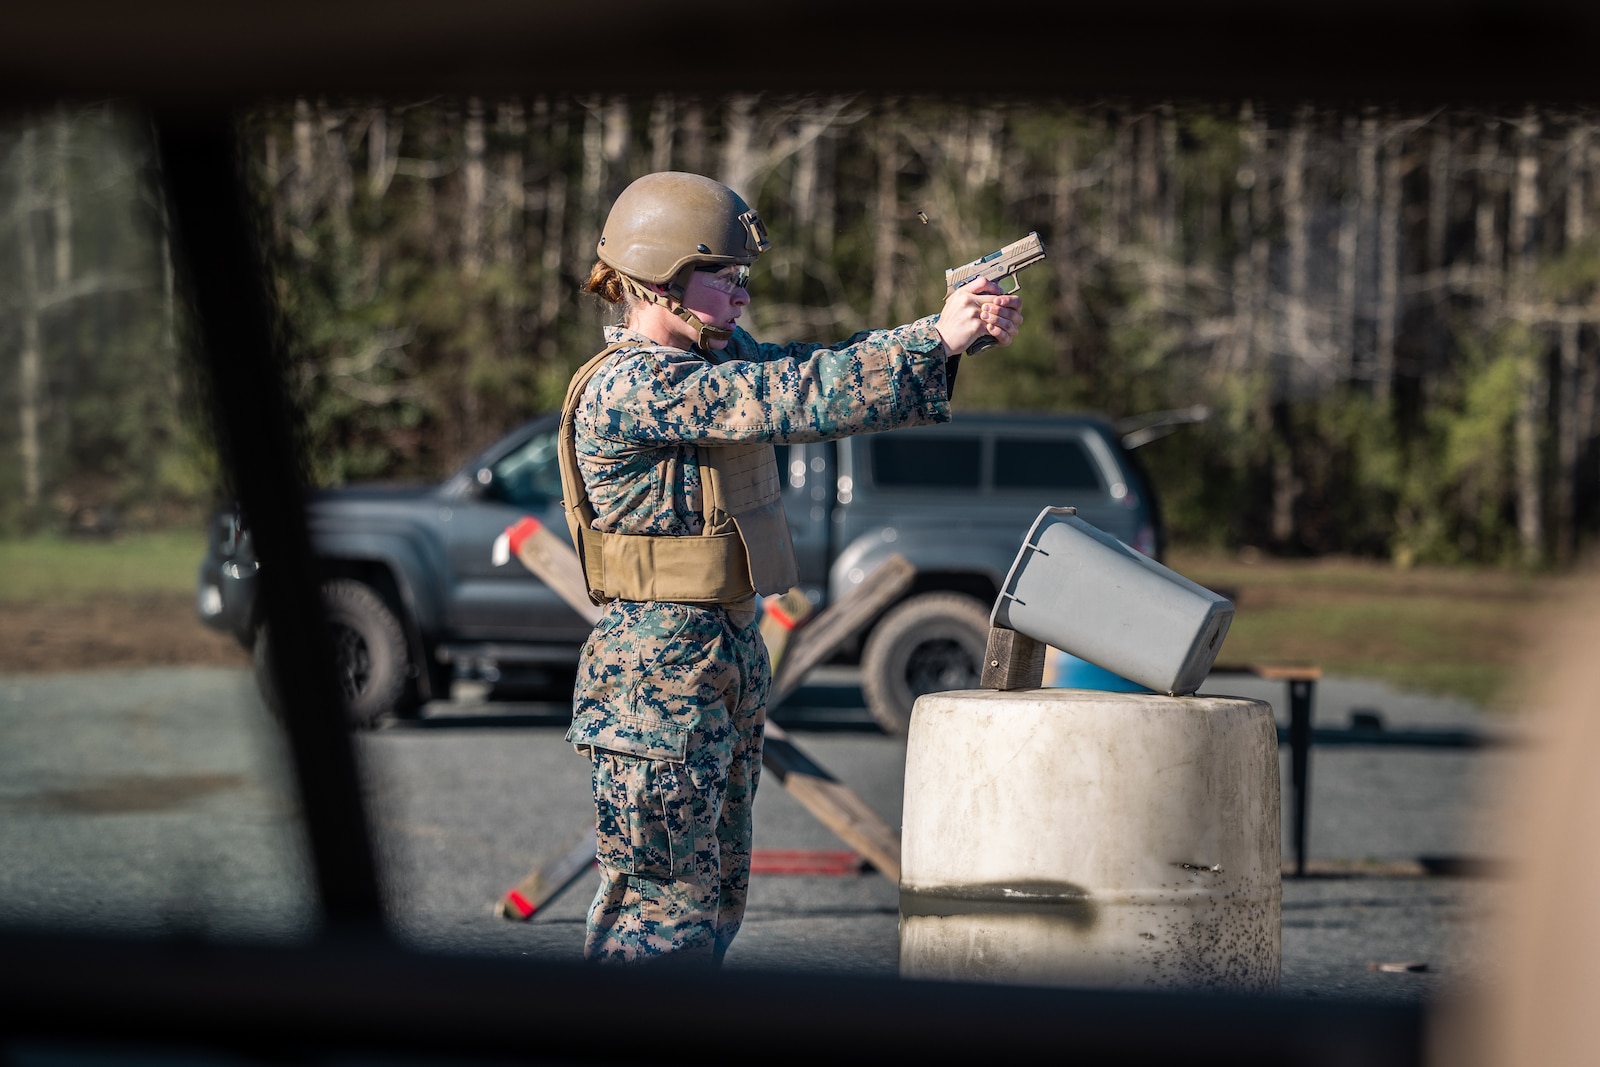 U.S. Marine Corps Cpl. Maddison Delgado Llamas, a helicopter crew chief with Marine Light Attack Helicopter Squadron 169, 3rd Marine Aircraft Wing, participates in a shooting drill during the Marine Corps Marksmanship Competition Matches at Weapons Training Battalion on Marine Corps Base Quantico, Virginia, April 5, 2024. The best competitors of the six regional MCMCs compete in various shooting disciplines at the championship matches. (U.S. Marine Corps photo by Lance Cpl. Joaquin Dela Torre)